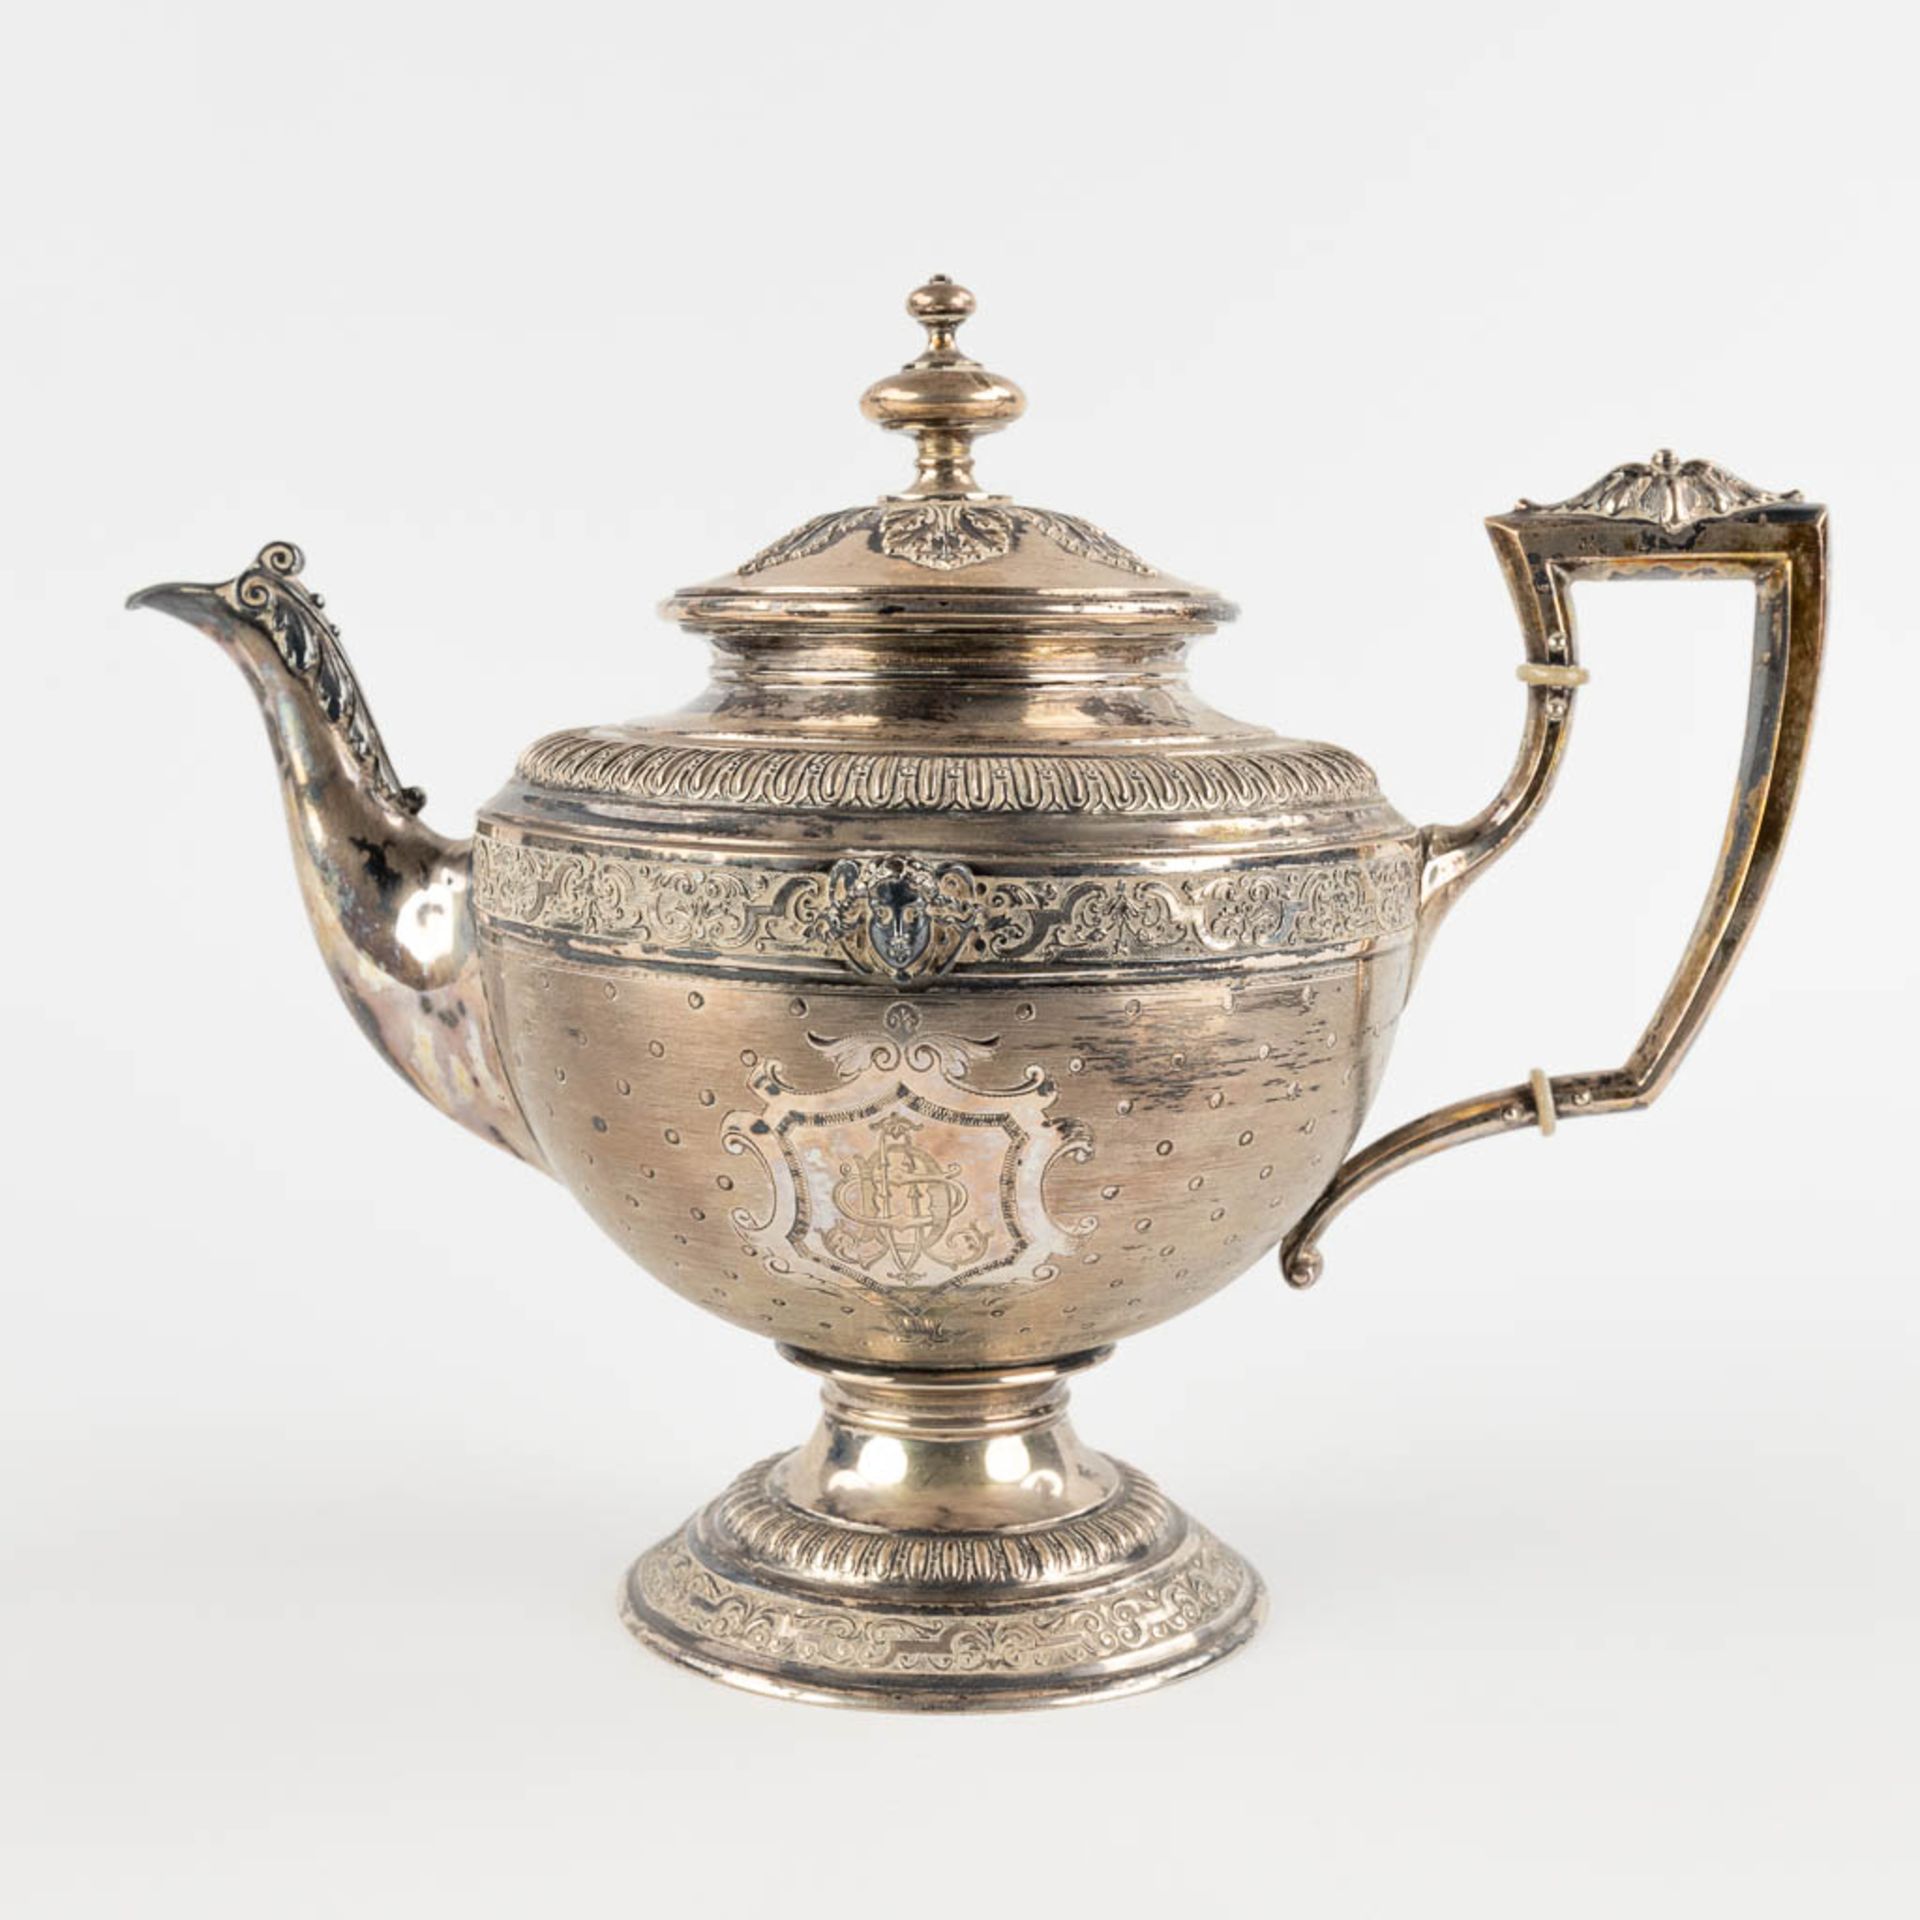 A teapot, silver, Germany. Gross: 659g. (D:16 x W:26 x H:21 cm) - Image 5 of 12